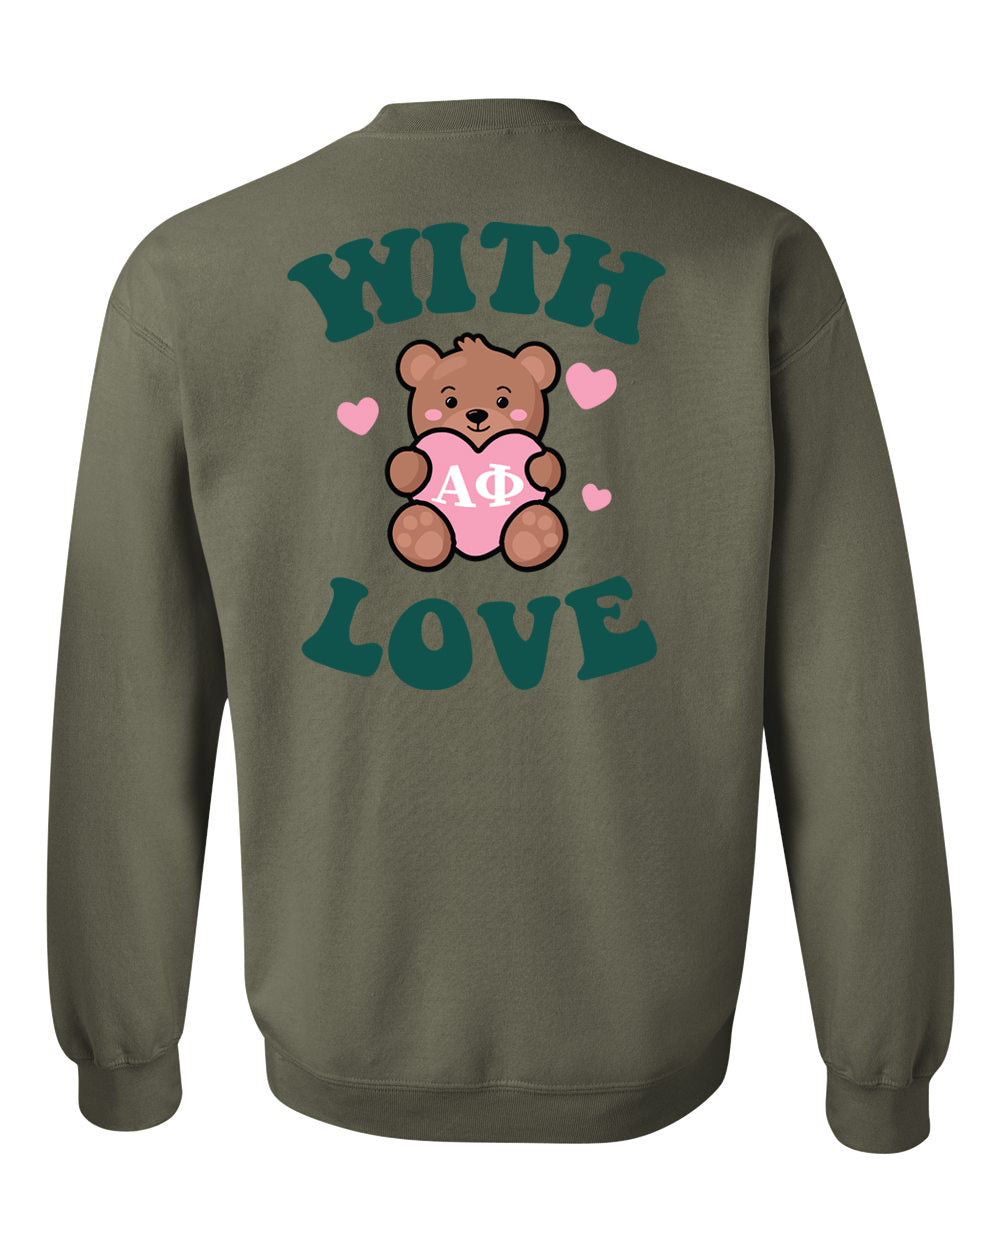 a green sweatshirt with a brown teddy bear holding a pink heart